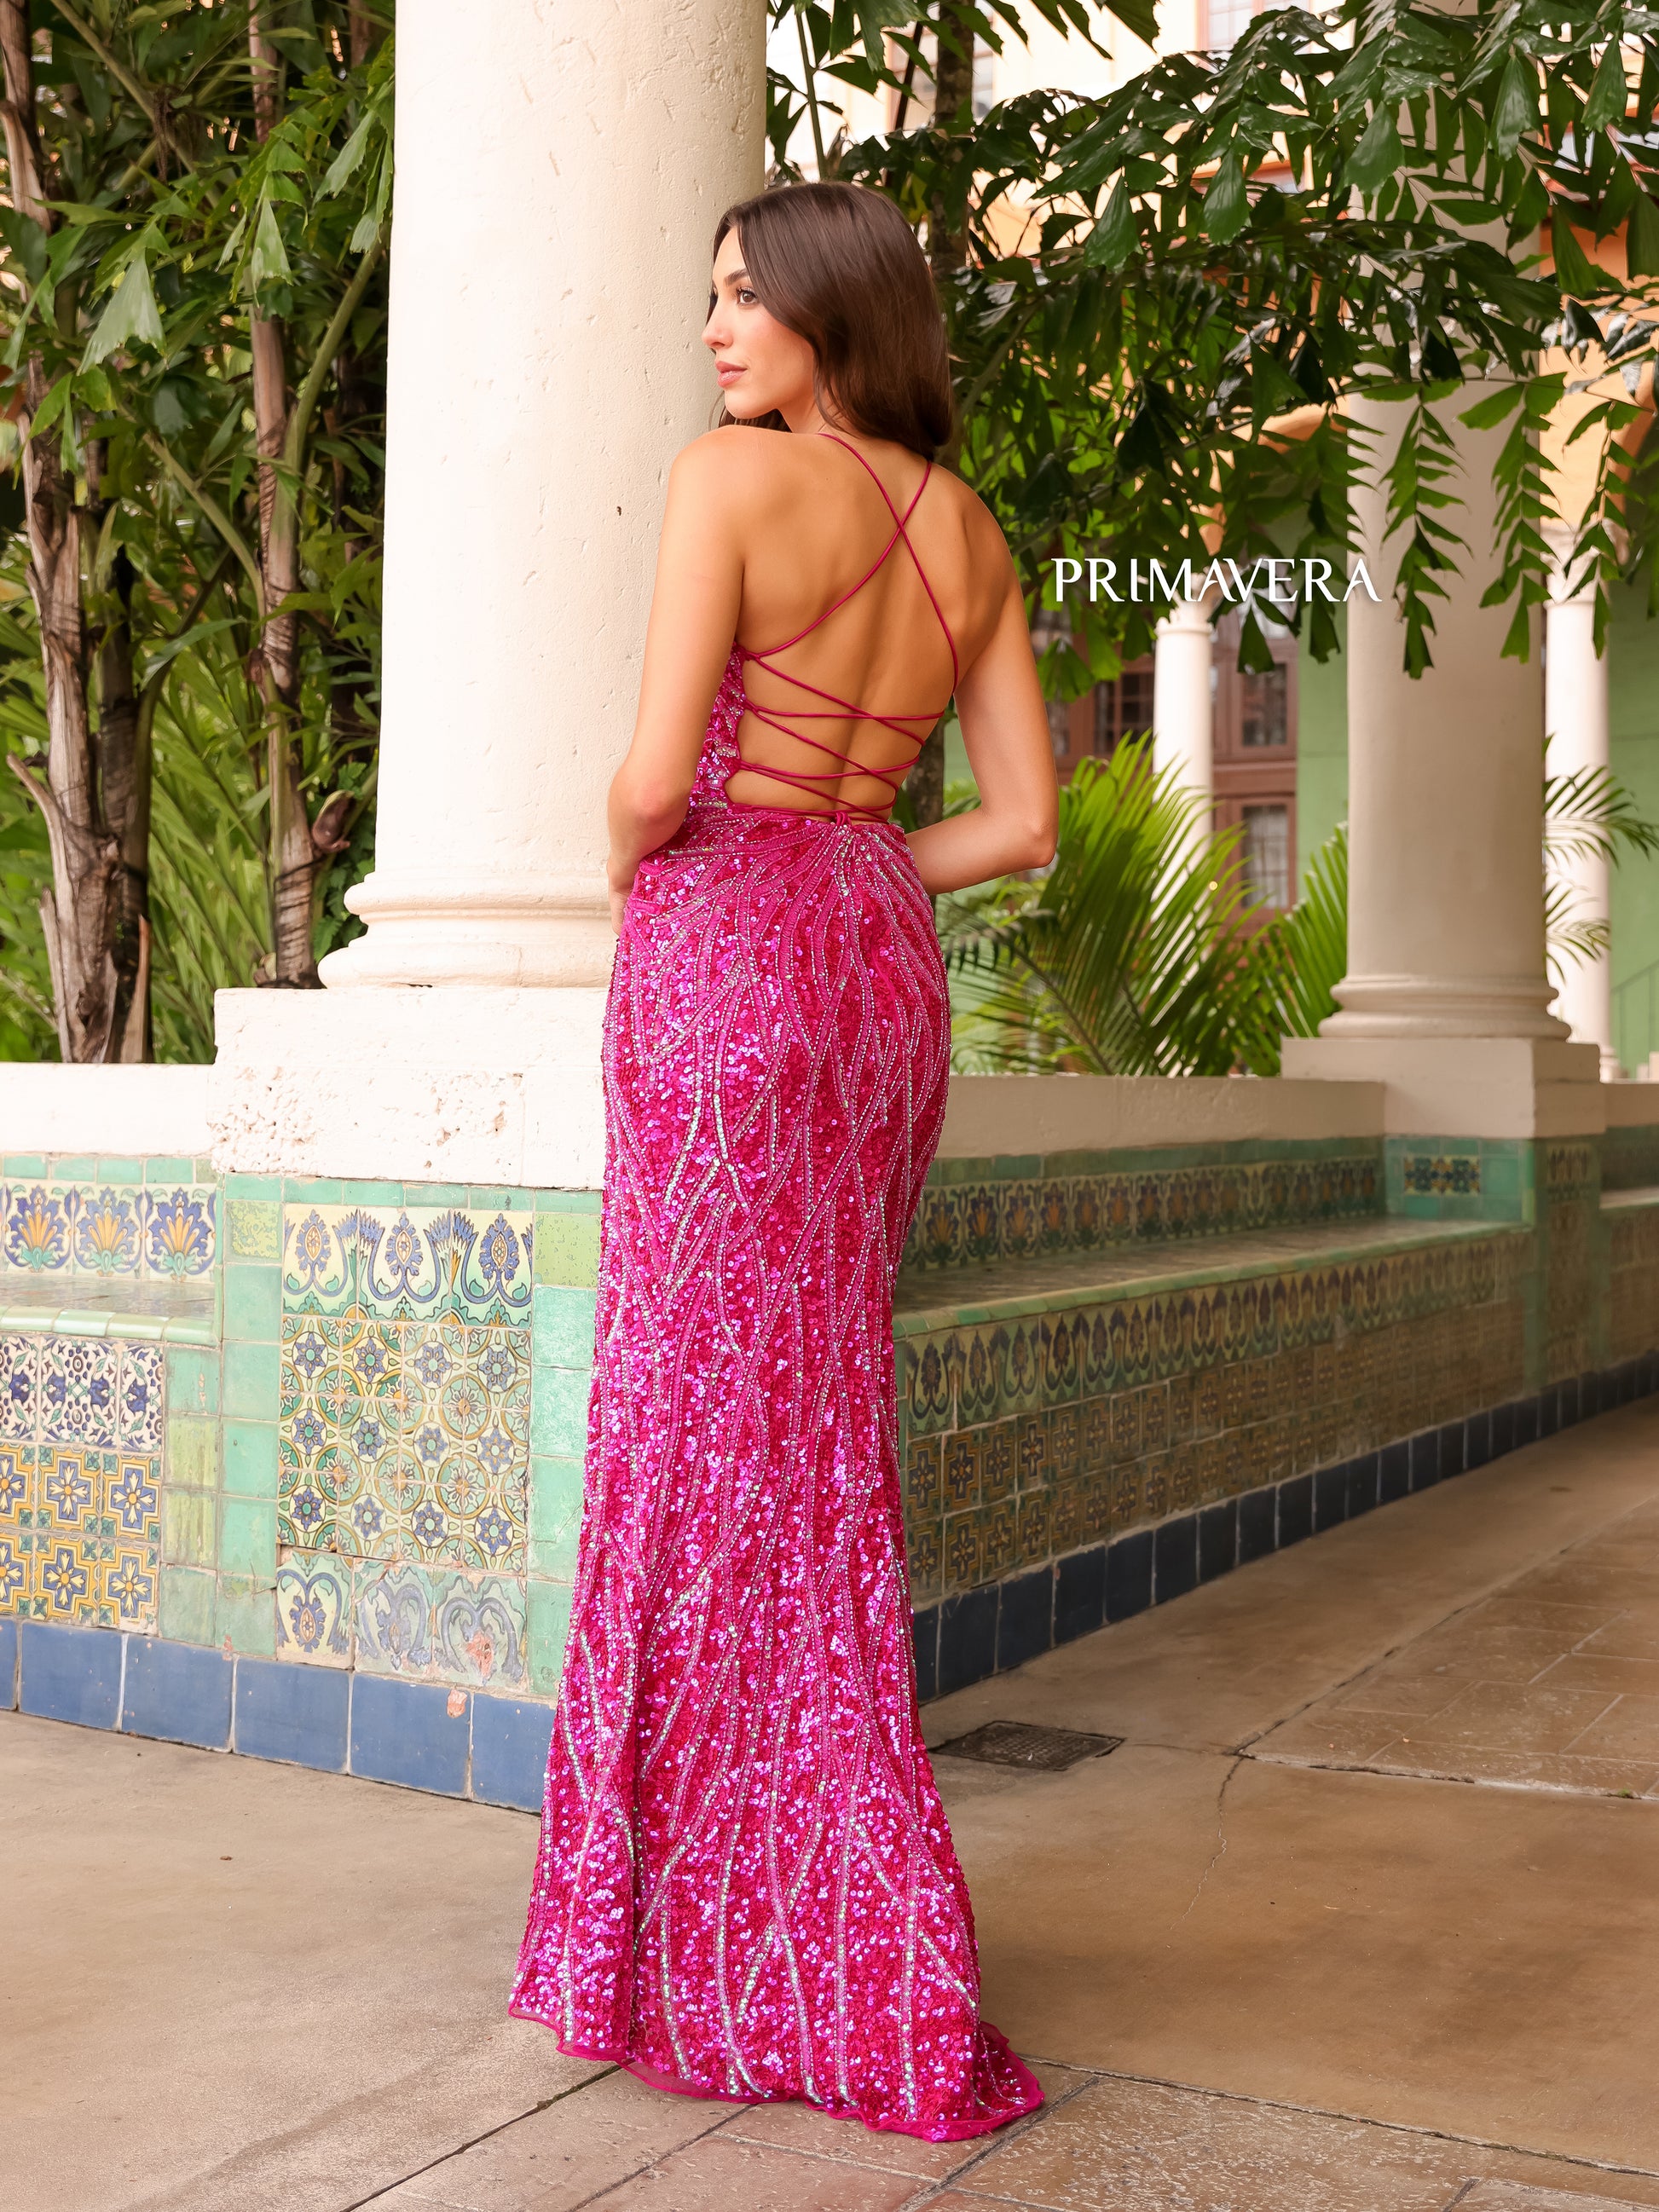 Primavera Couture 3959 Prom Dress Long Beaded Gown. This Gown has a beautiful design all over. Primavera Couture 3959 Sequin Scoop neck Prom Dress Backless Corset Slit Formal Gown  Size- 14  Colors- Fuchsia